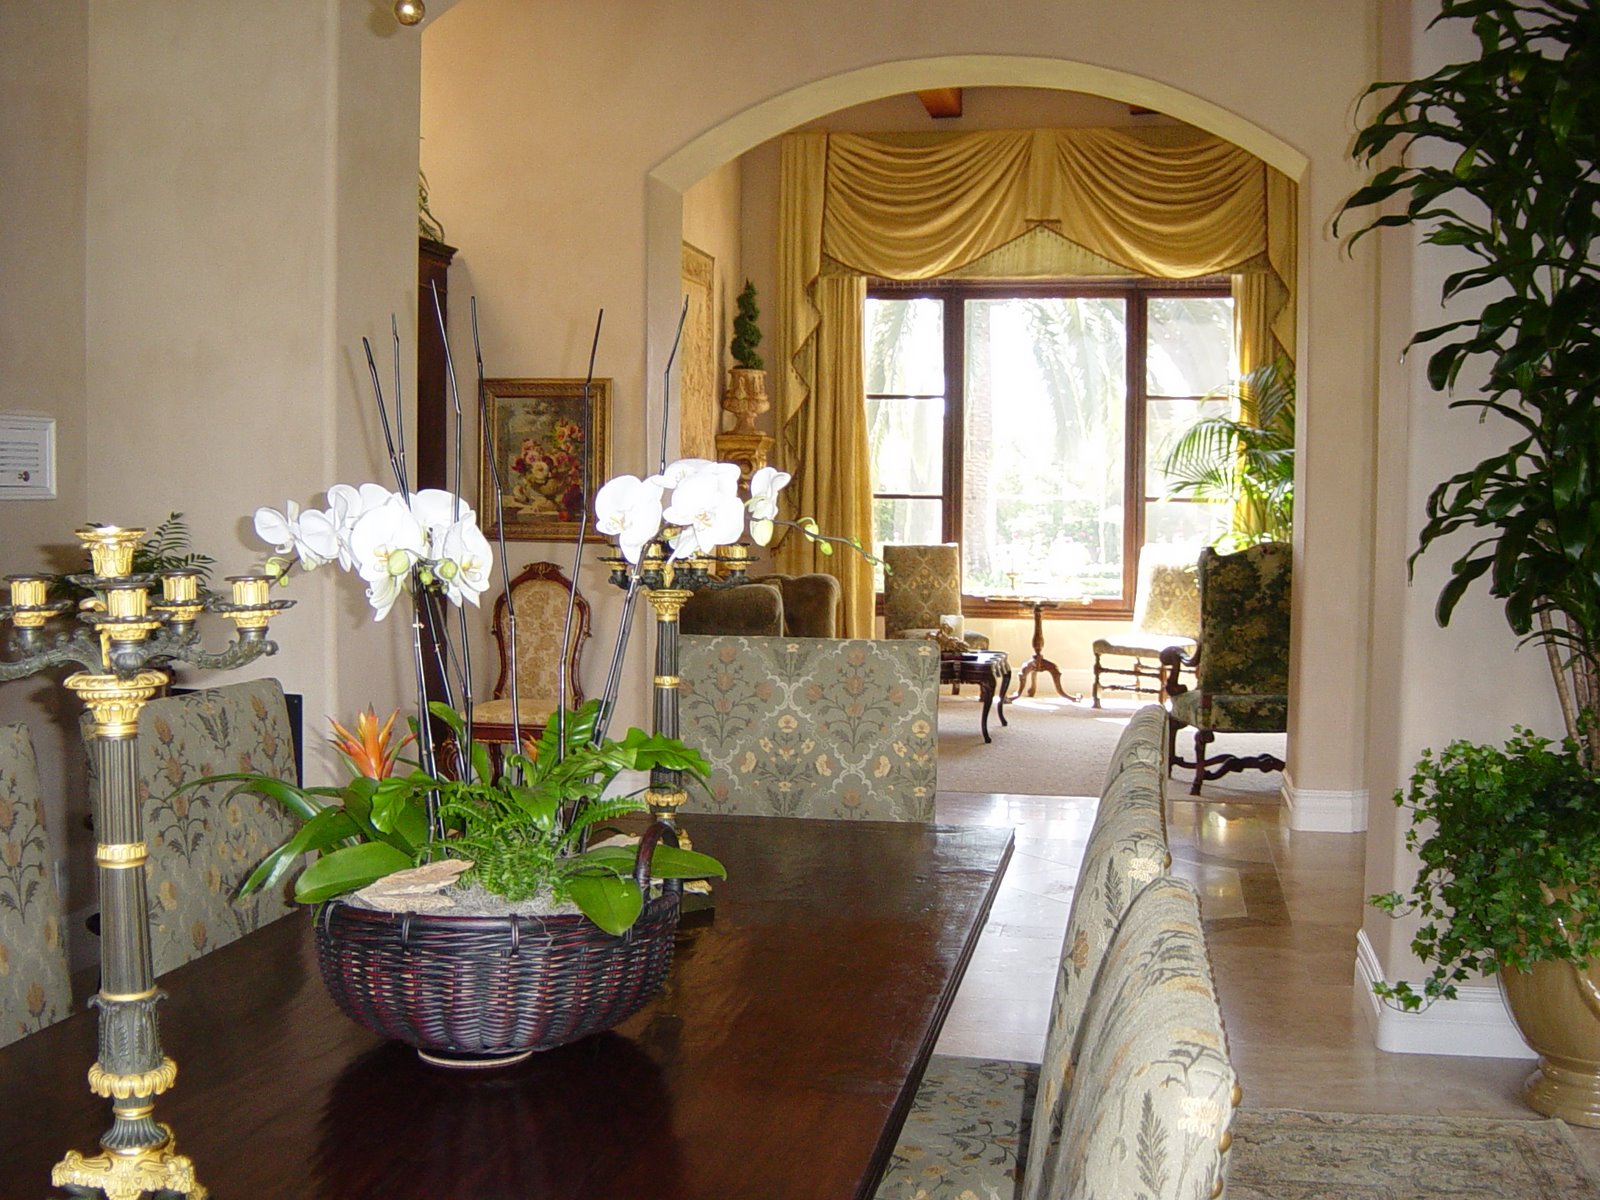 Table orchid estate image.JPG